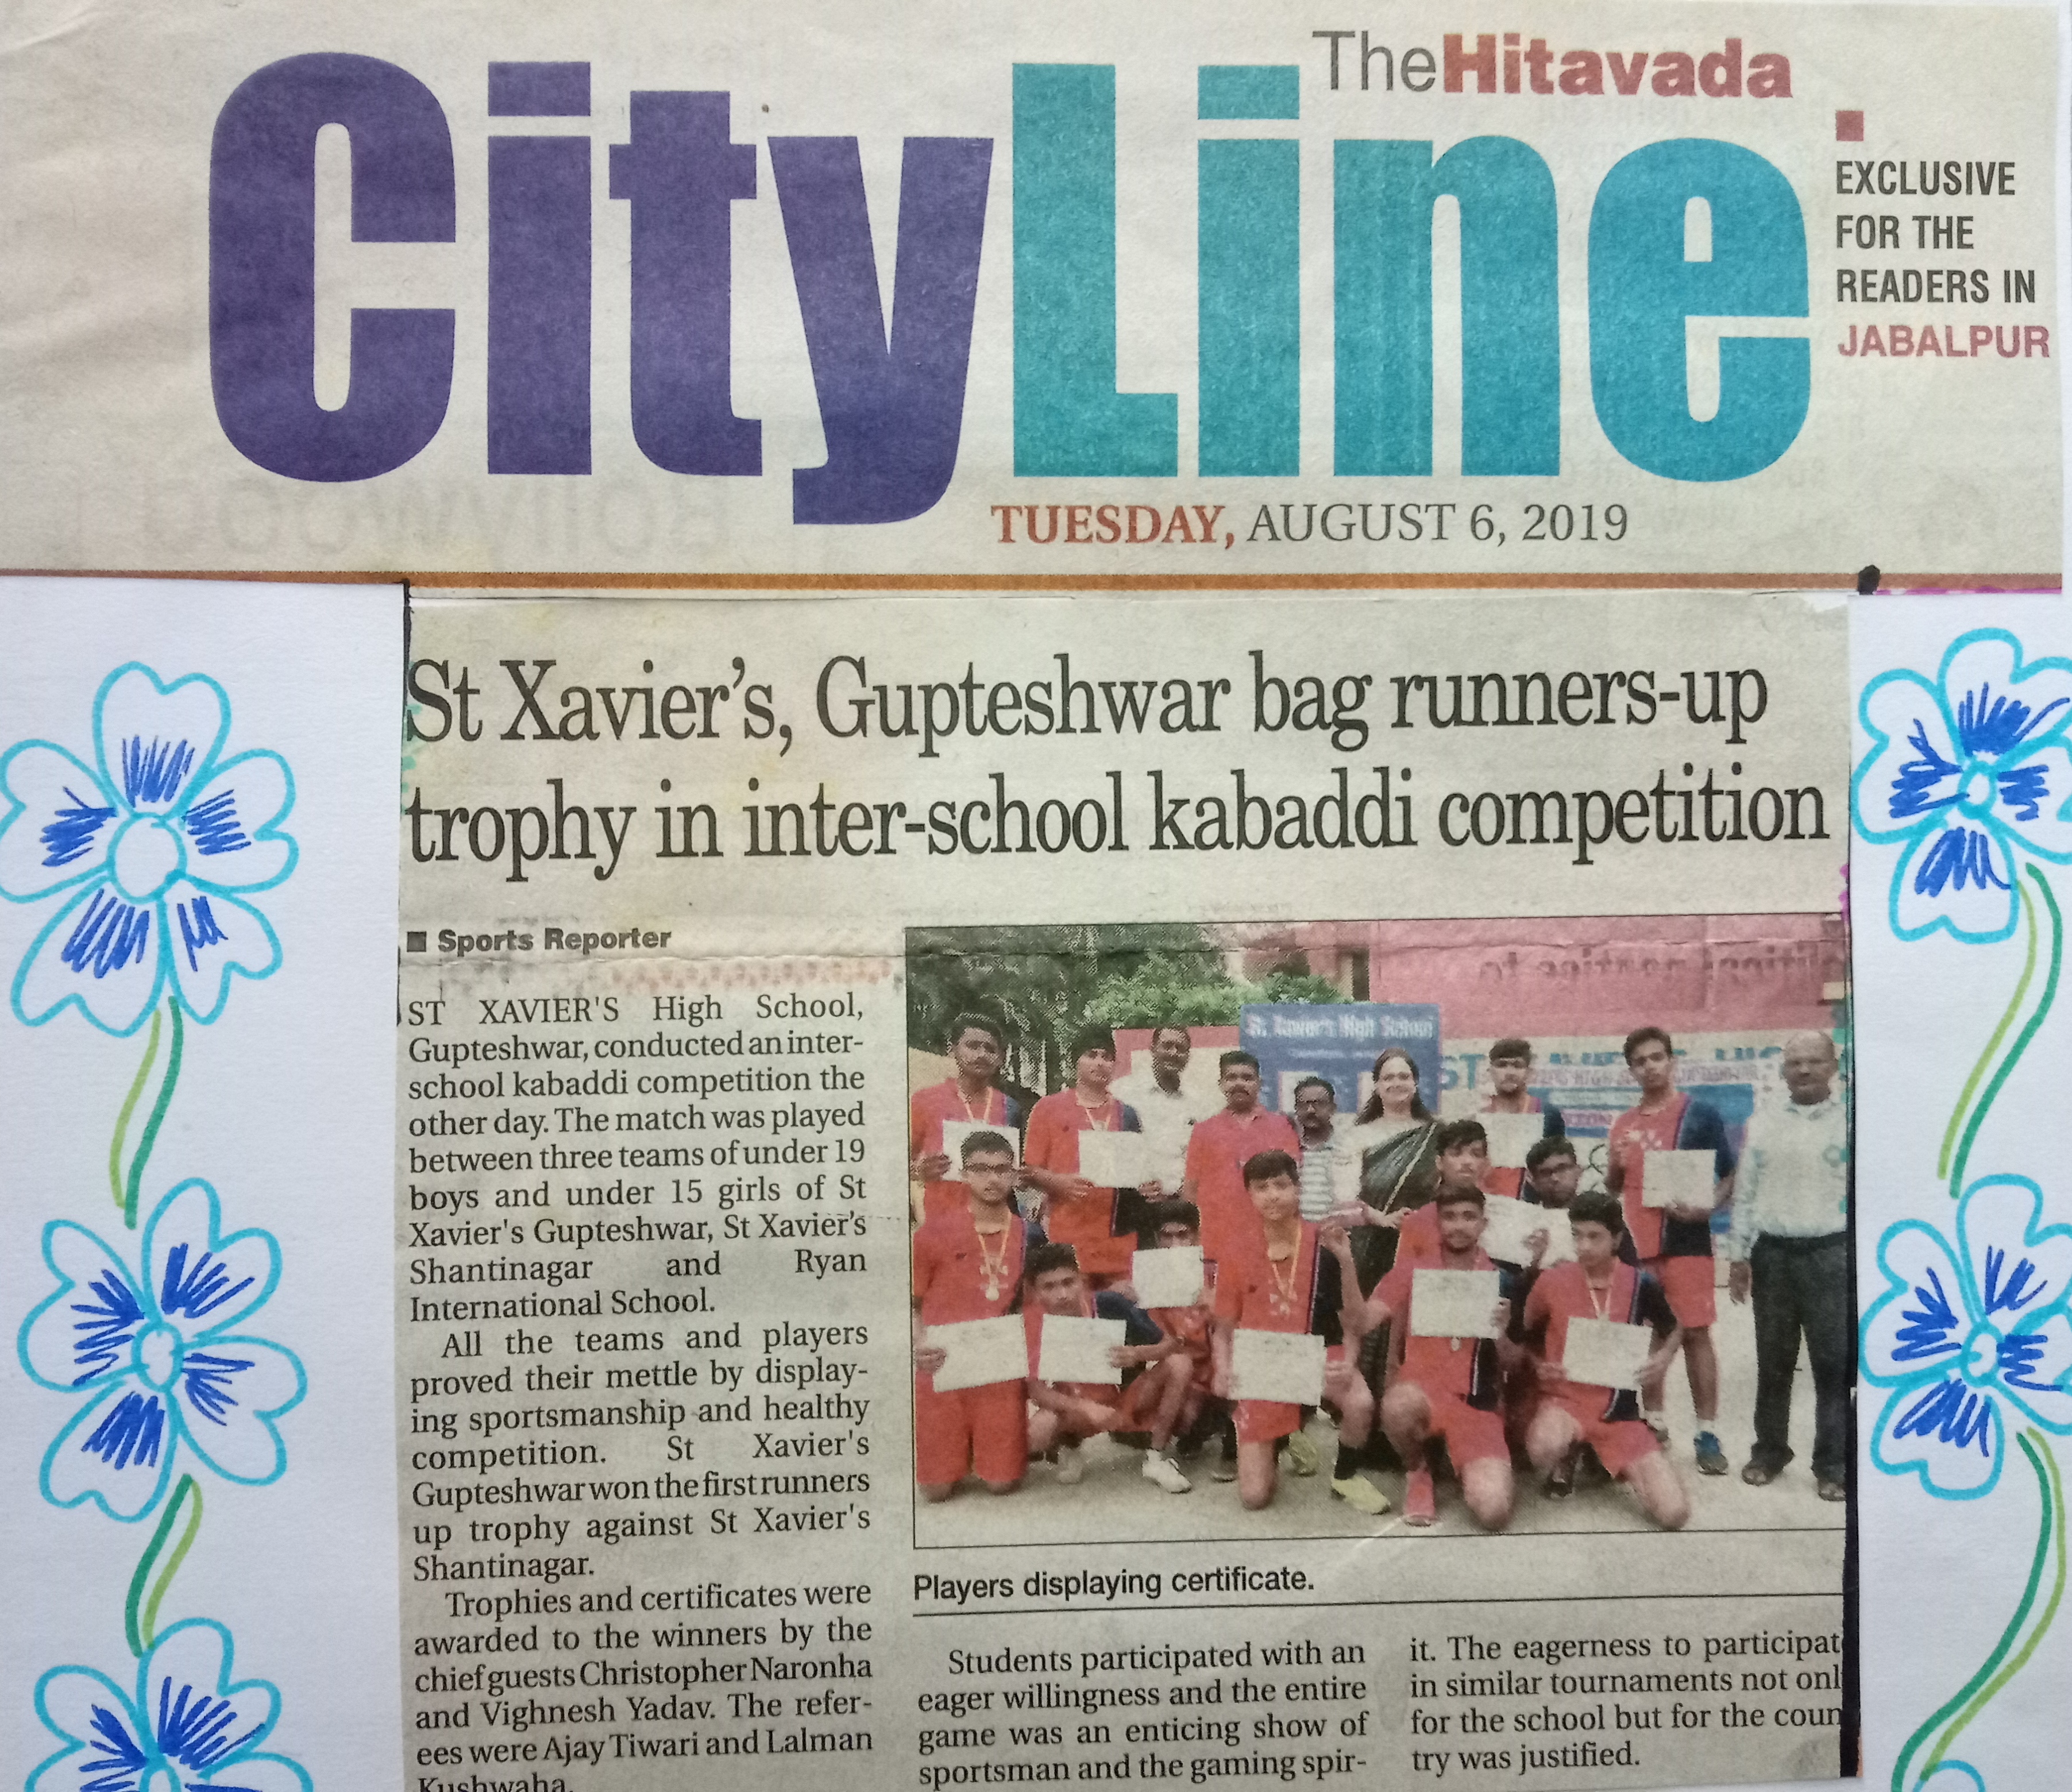 “Interschool Kabbadi Competition” was published in the The Hitavada